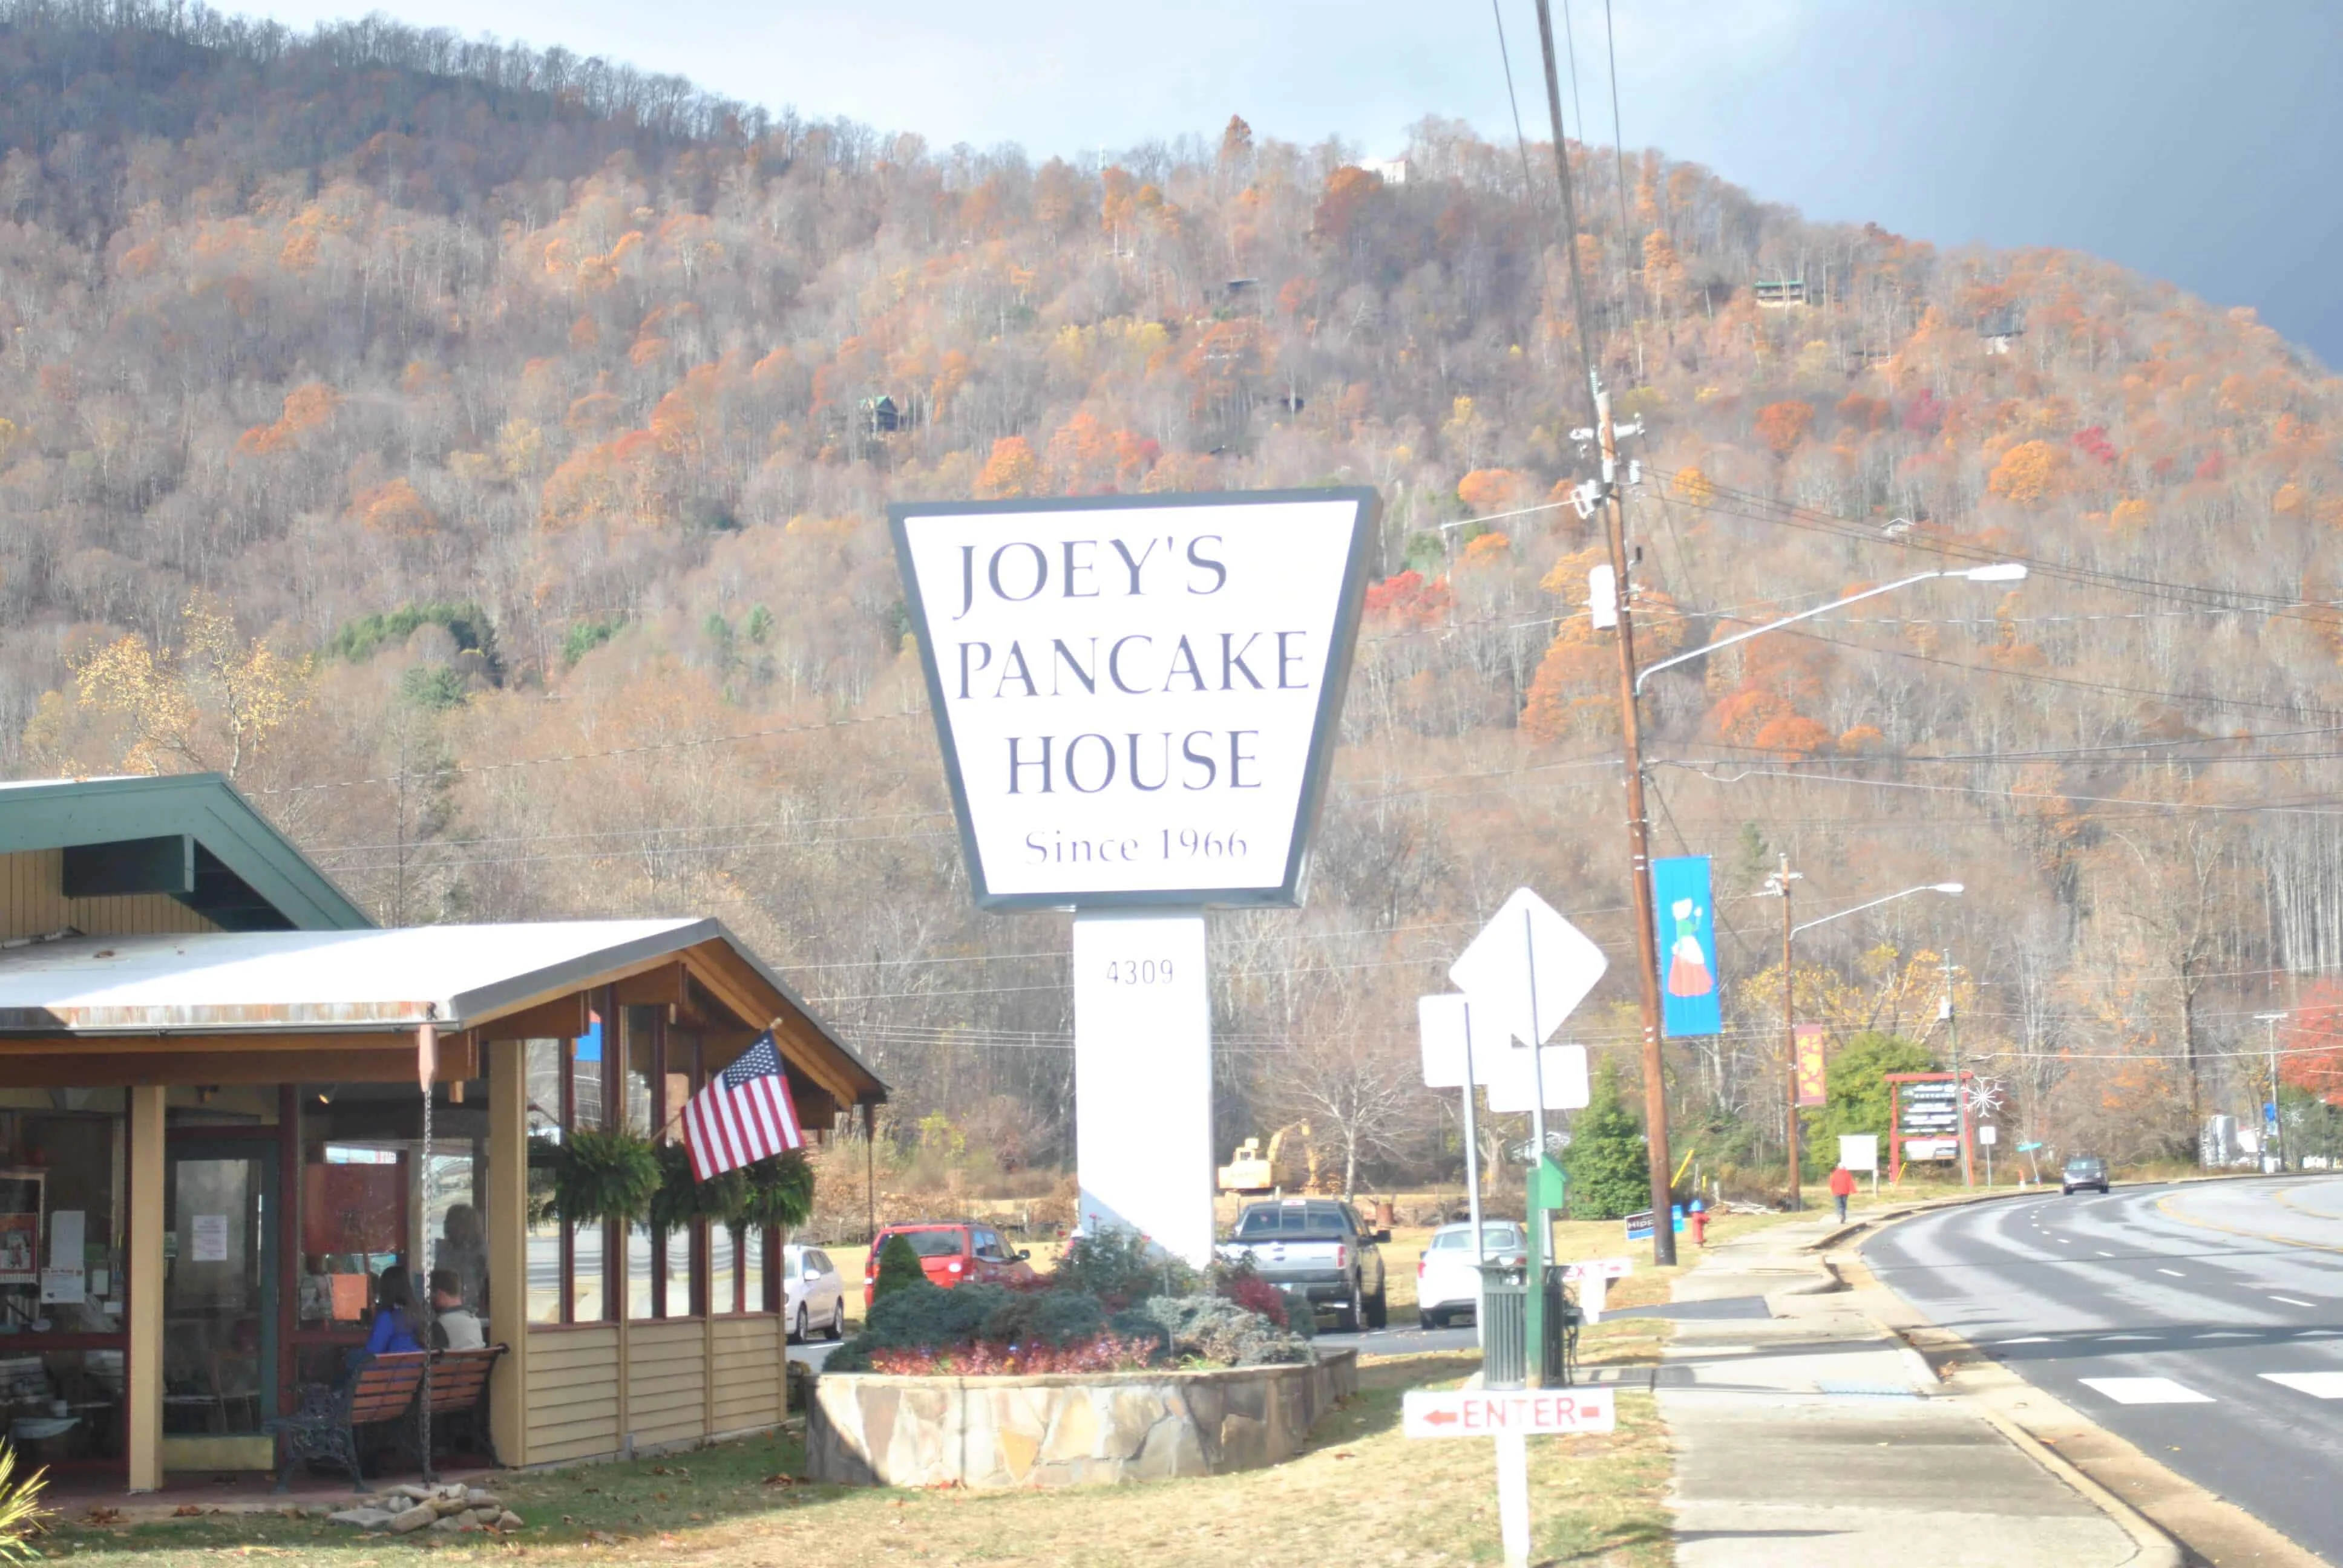 This is a image of the sign out front of Joey's Pancake house in Maggie Valley NC.